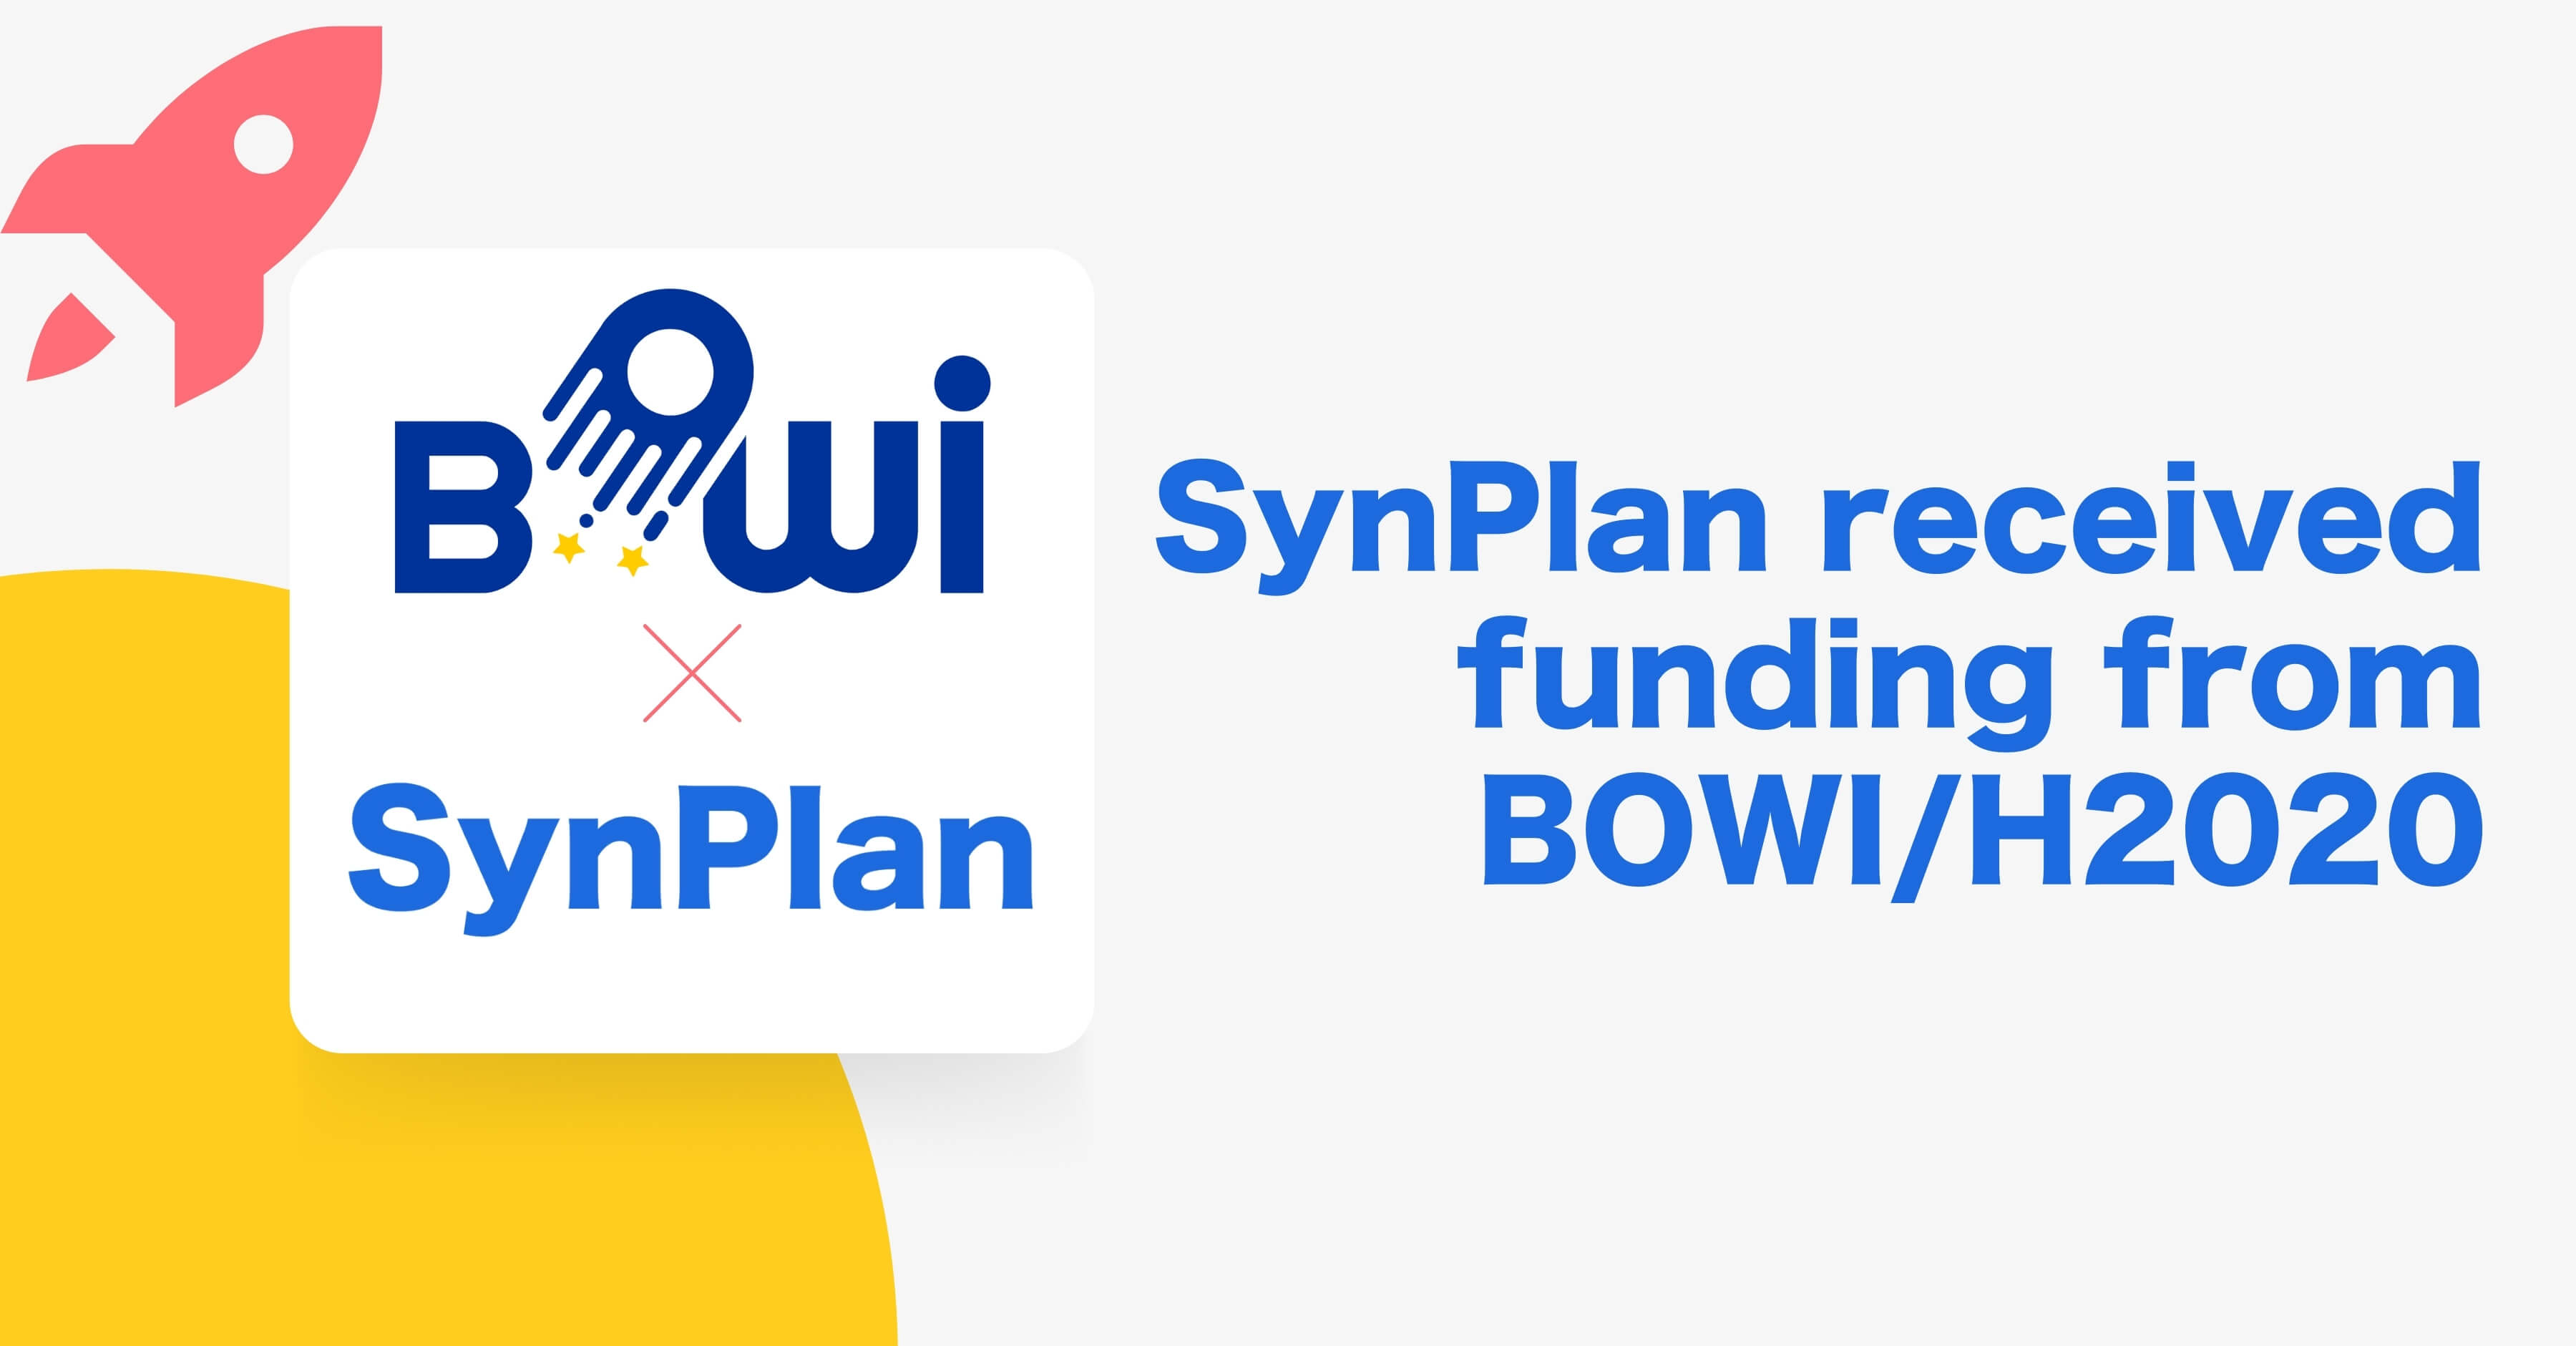 SynPlan received funding from BOWI/H2020 to better healthcare workforce planning with AI